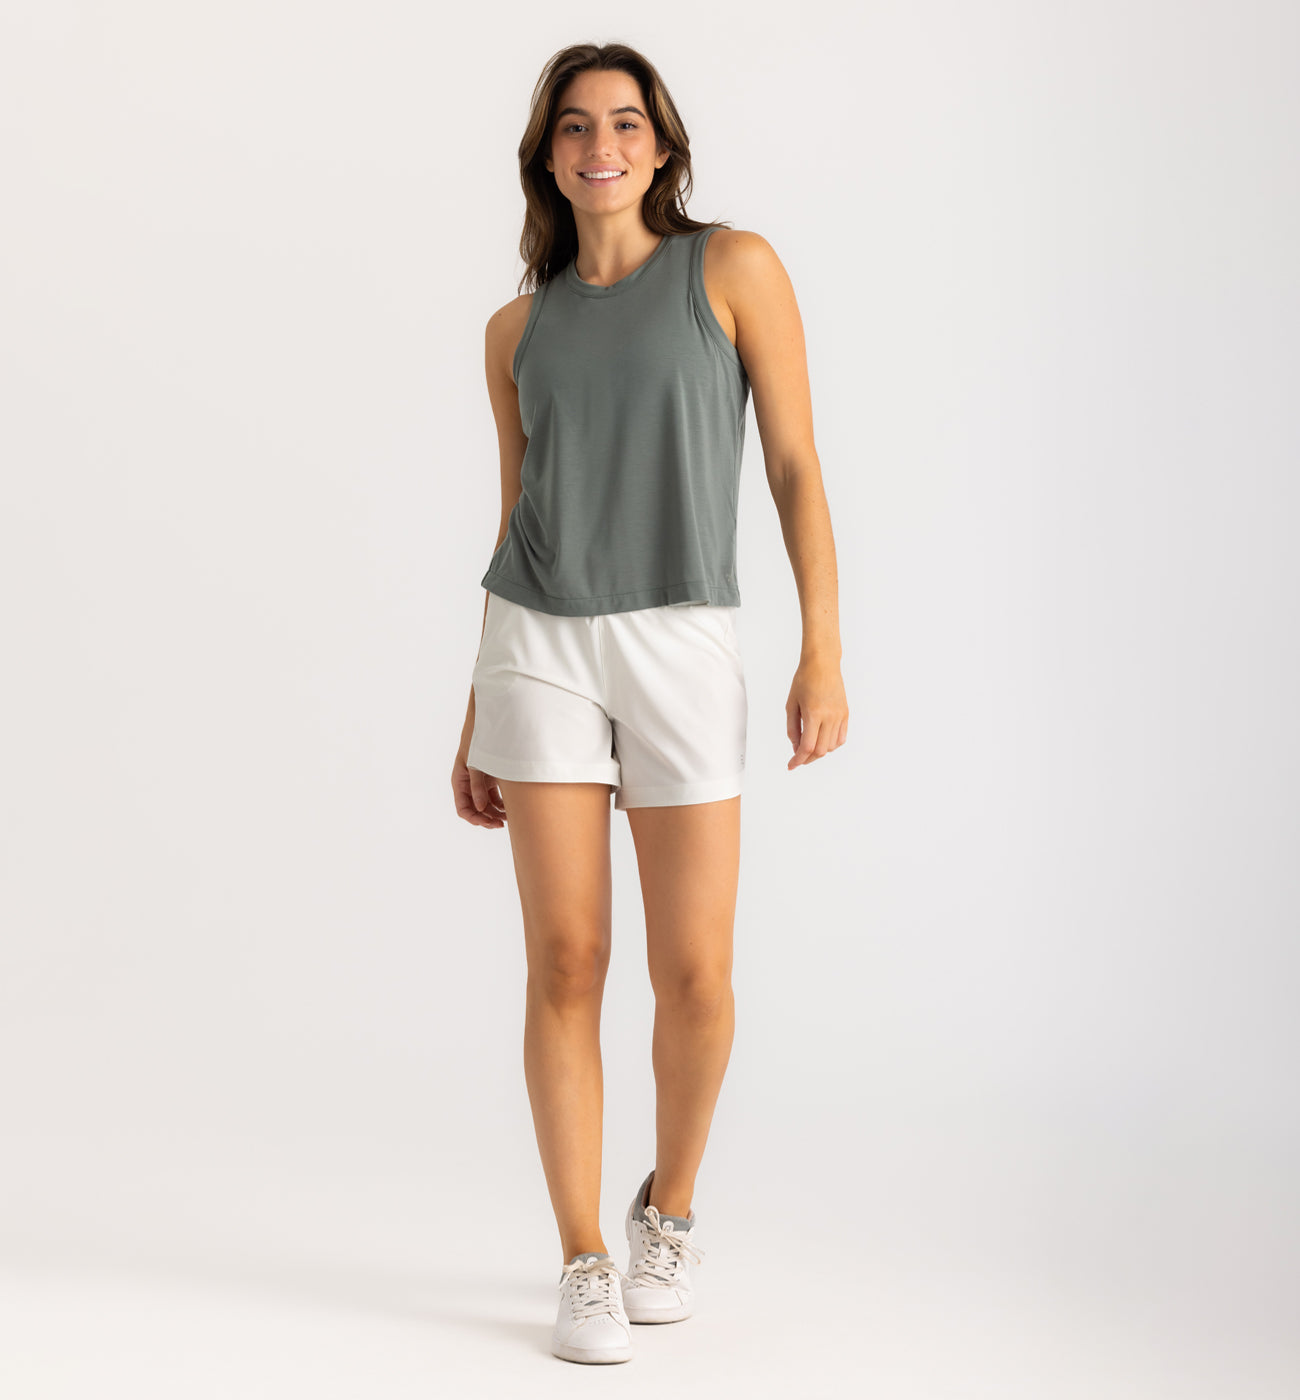 Bamboo-Lined Active Breeze Short for Women - 5 Sea Salt / Small